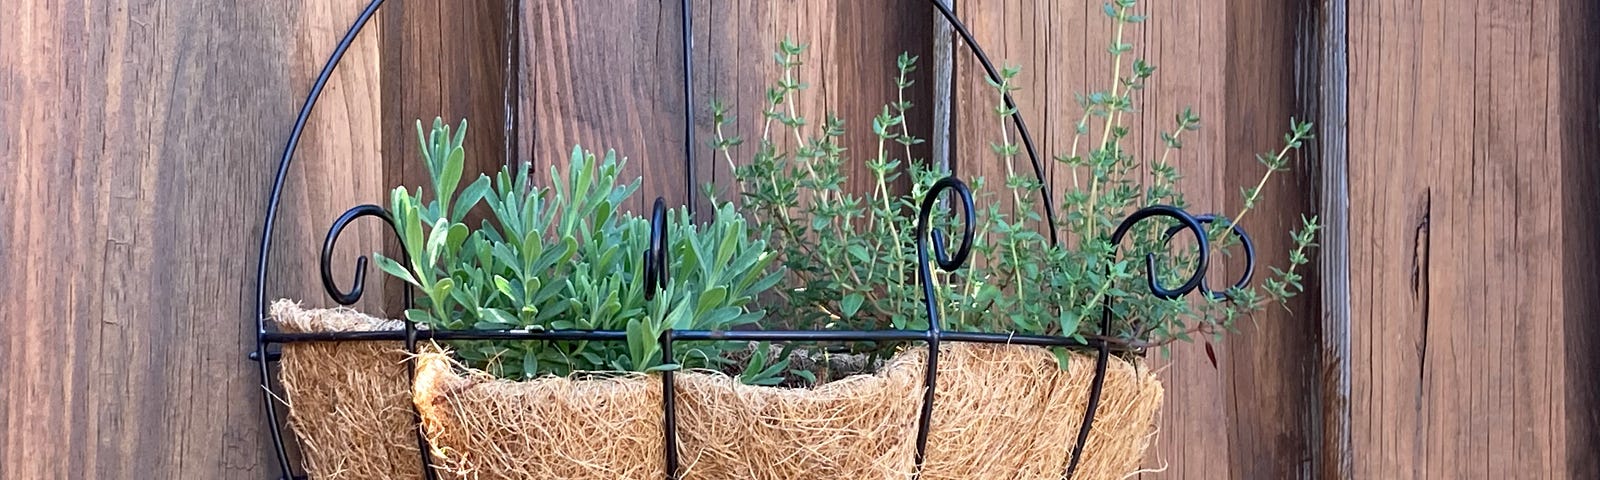 Planter filled with herbs on fence.